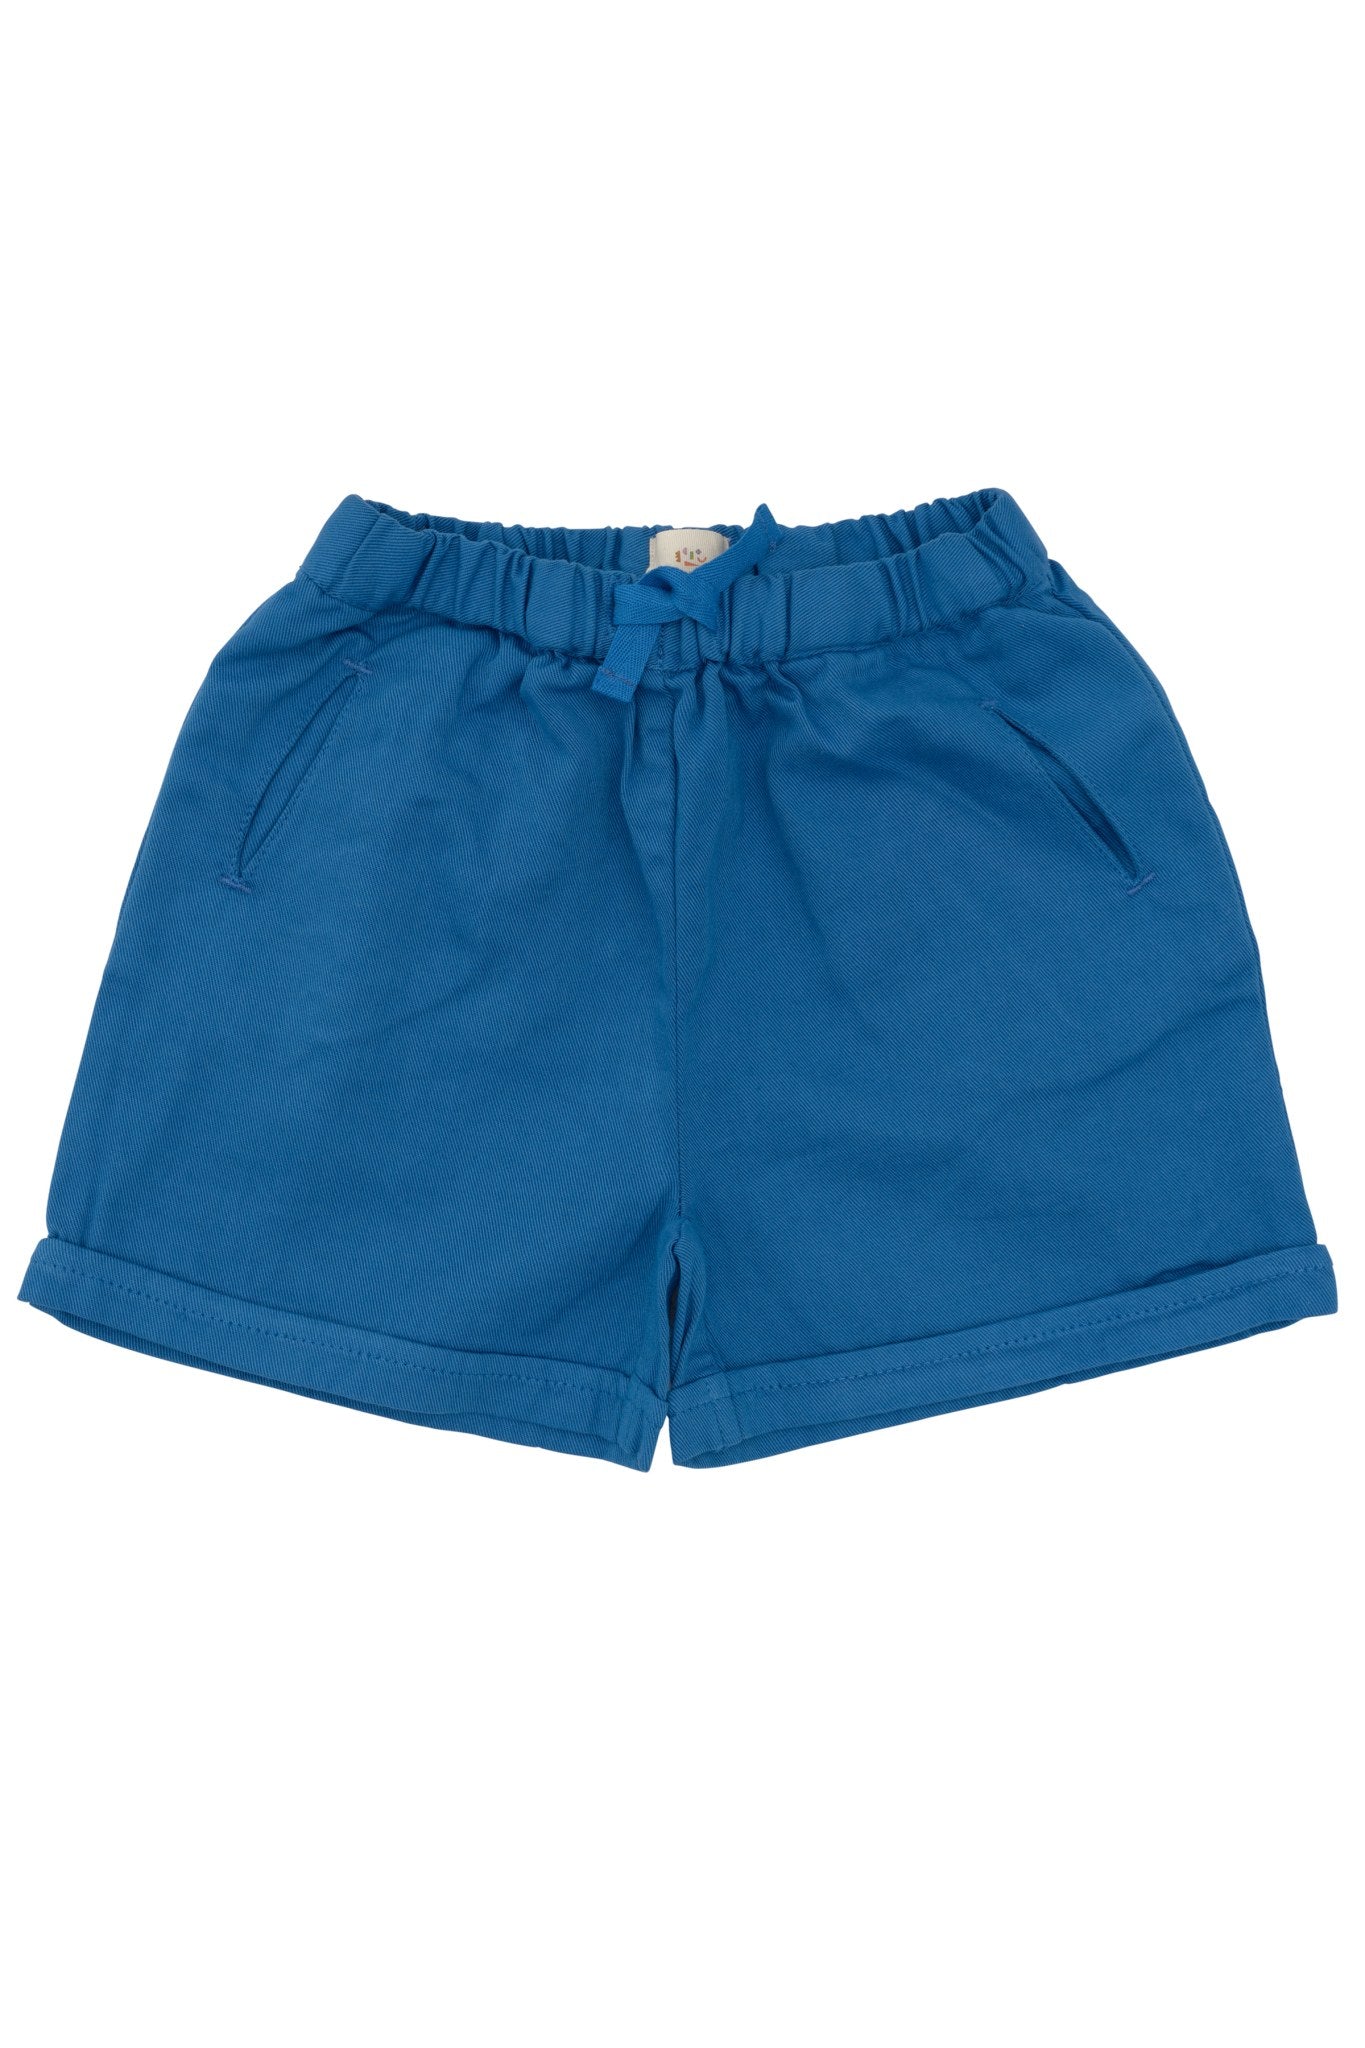 TWILL SHORTS W. EMBROIDERY - SHARP BLUE